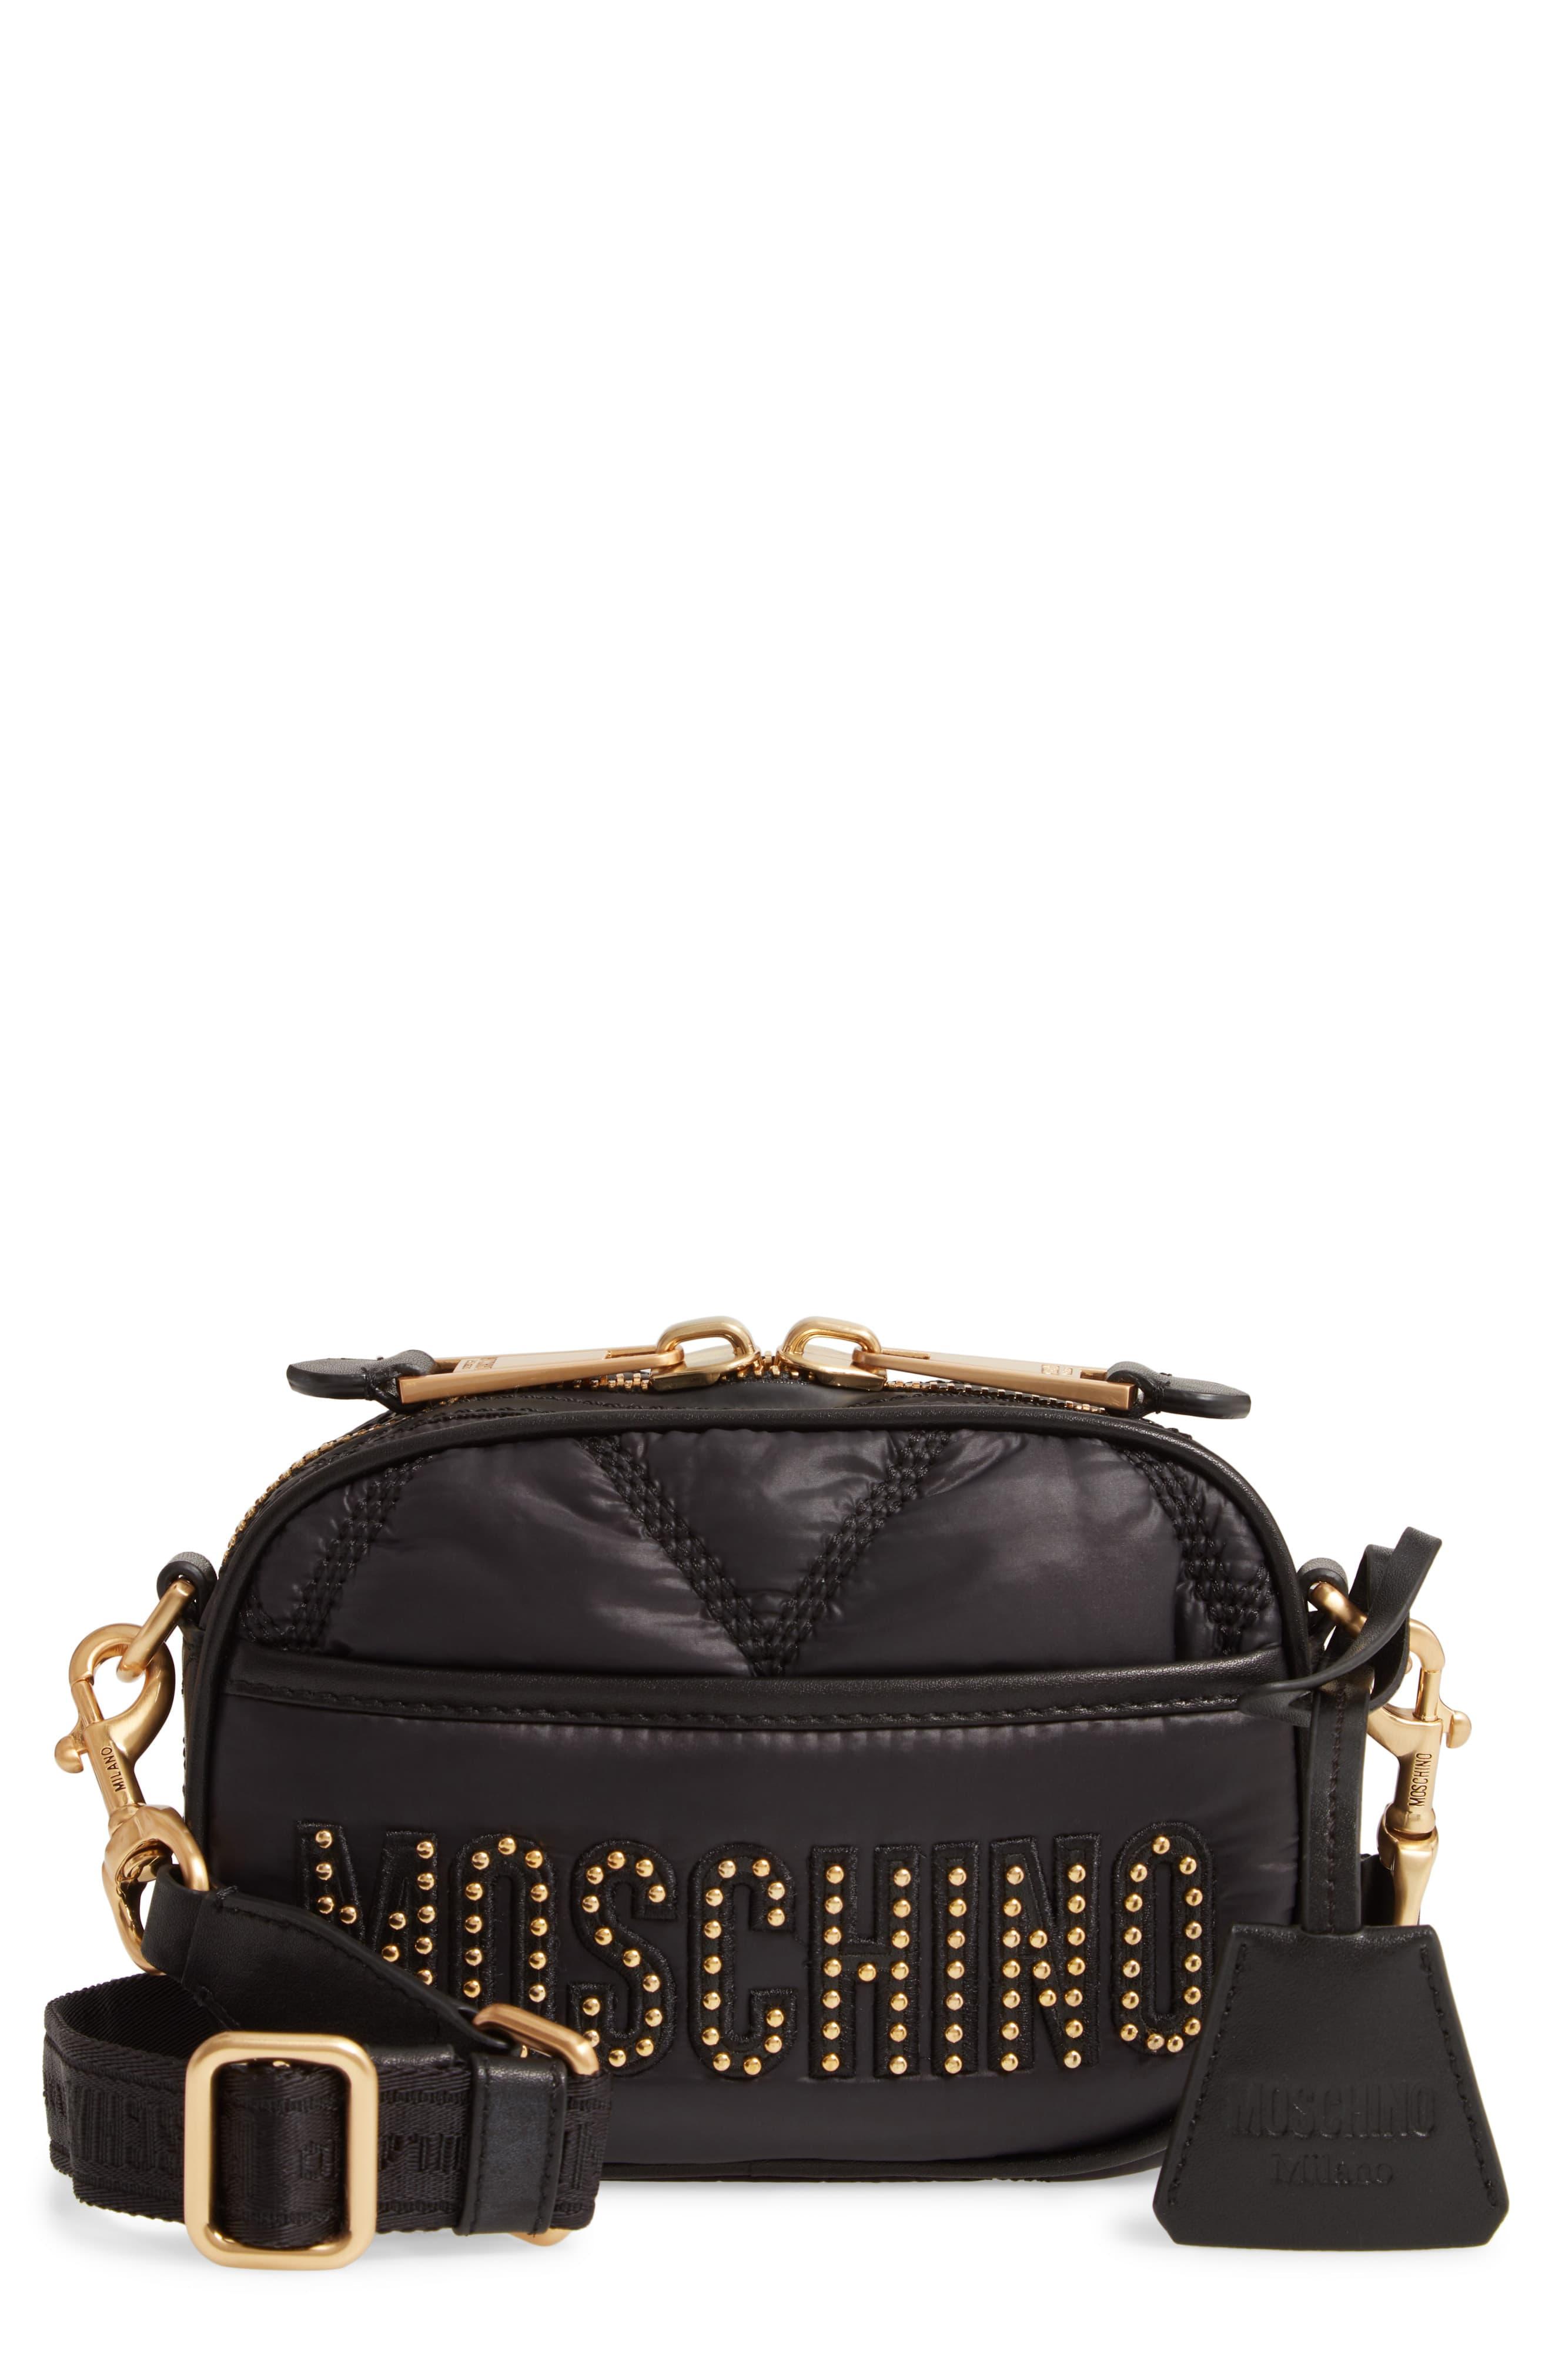 Moschino Synthetic Quilted Nylon Crossbody Bag in Black - Lyst